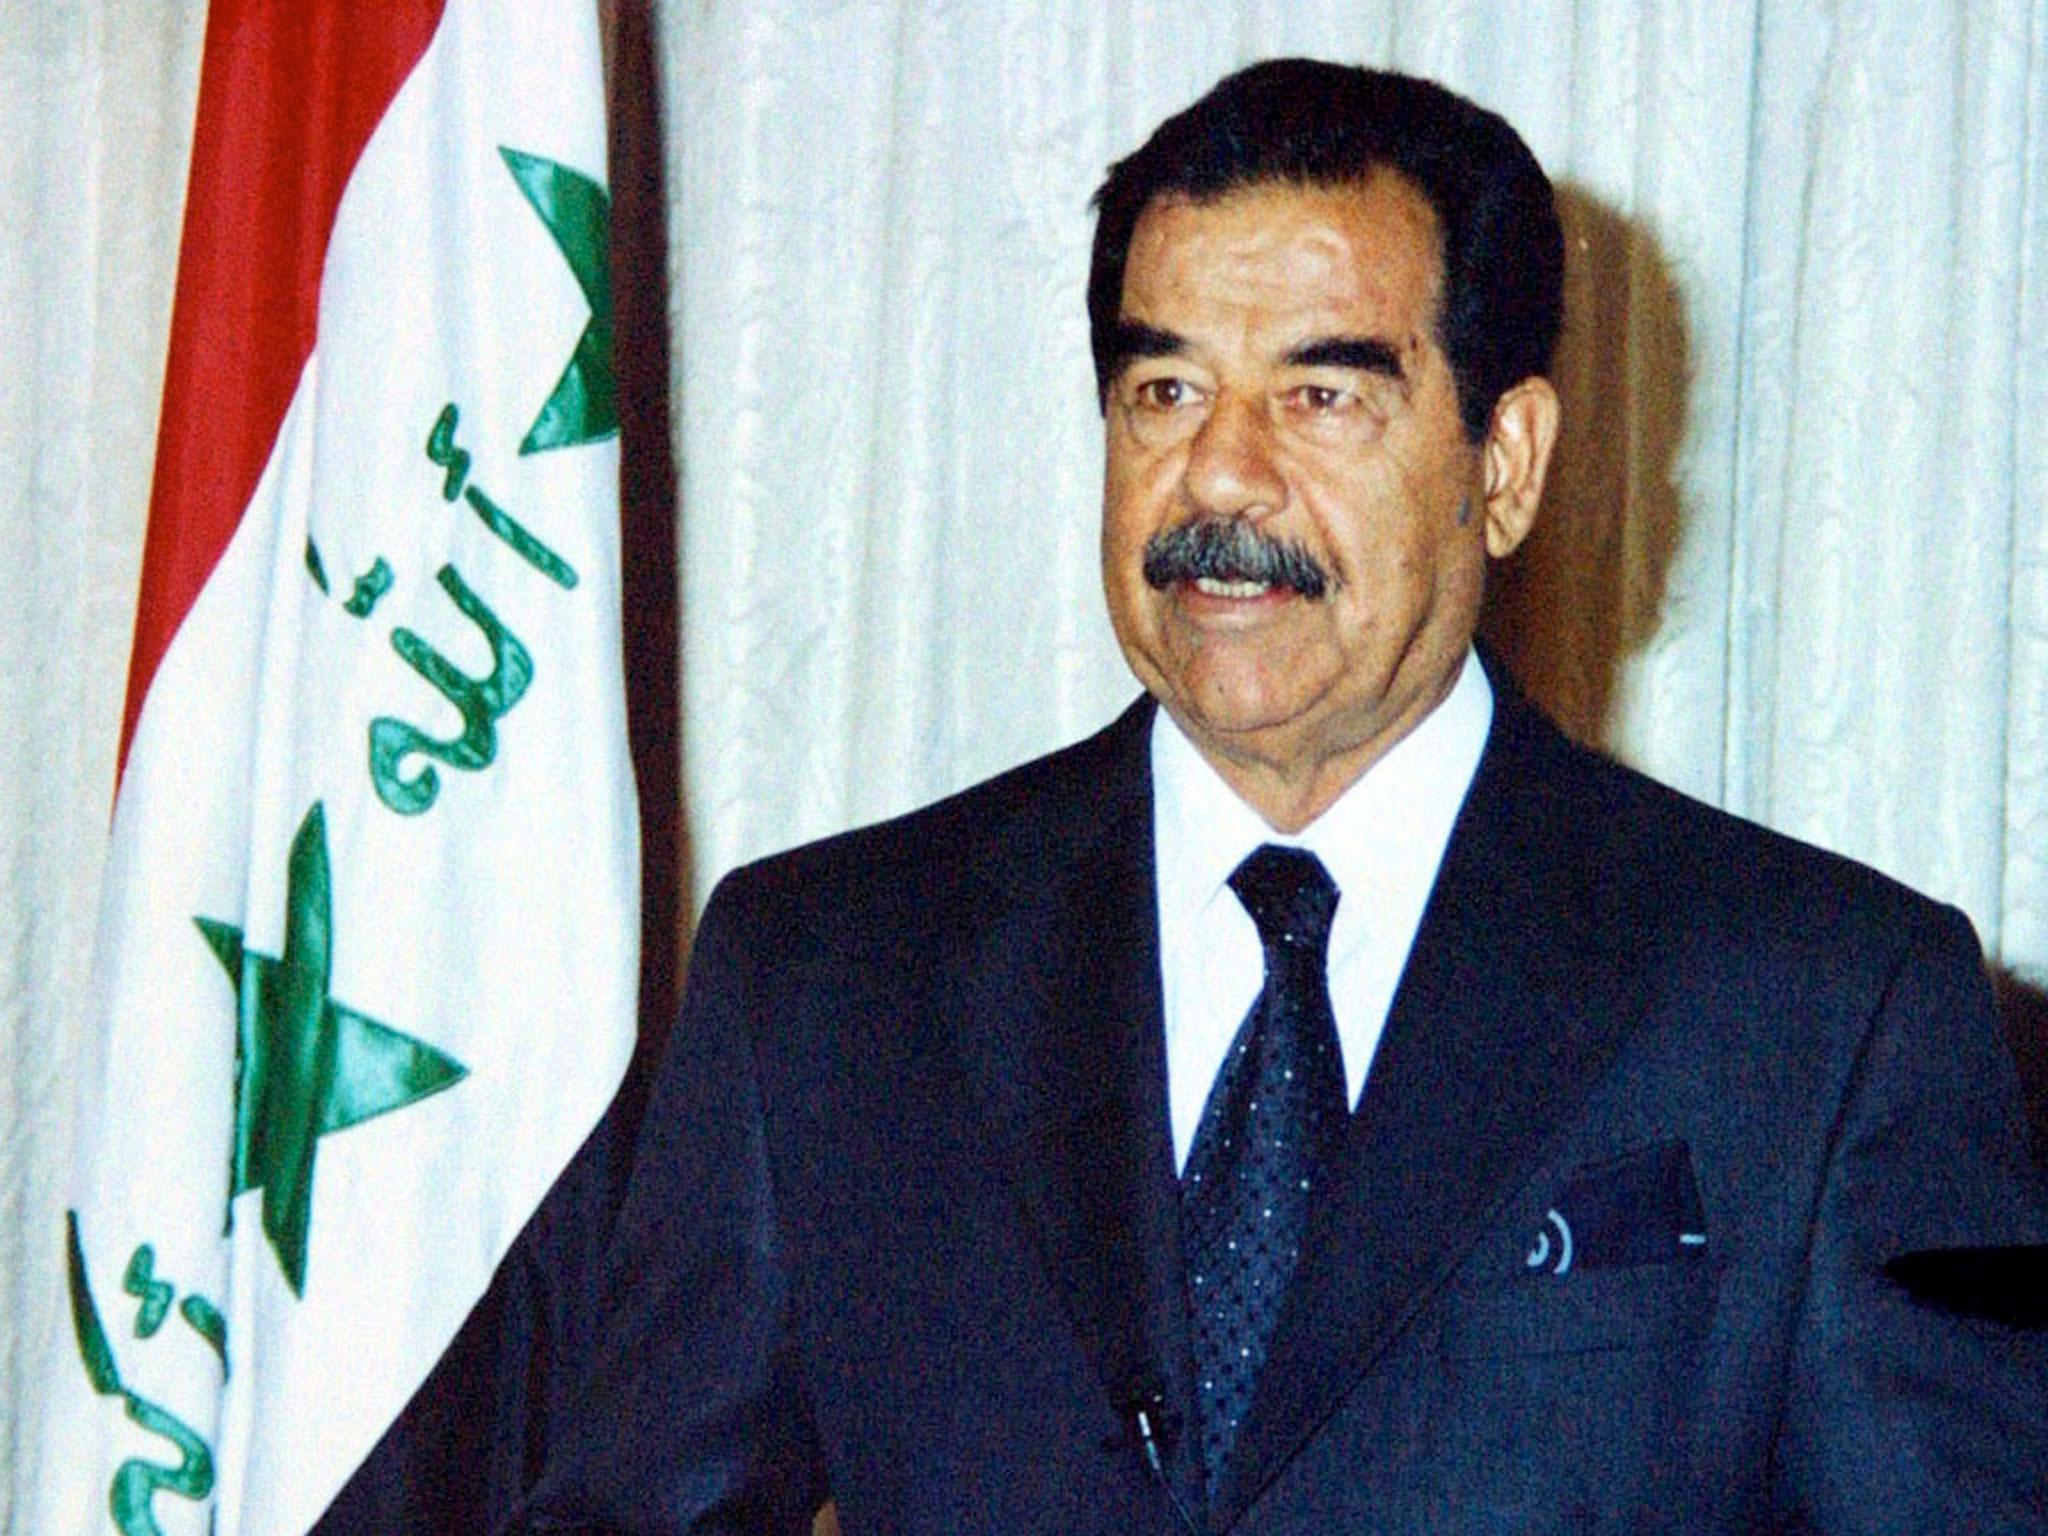 Numerous people in Iraq were also given the name Saddam Hussein in tribute to the dictator, who ruled from 1979 until 2003